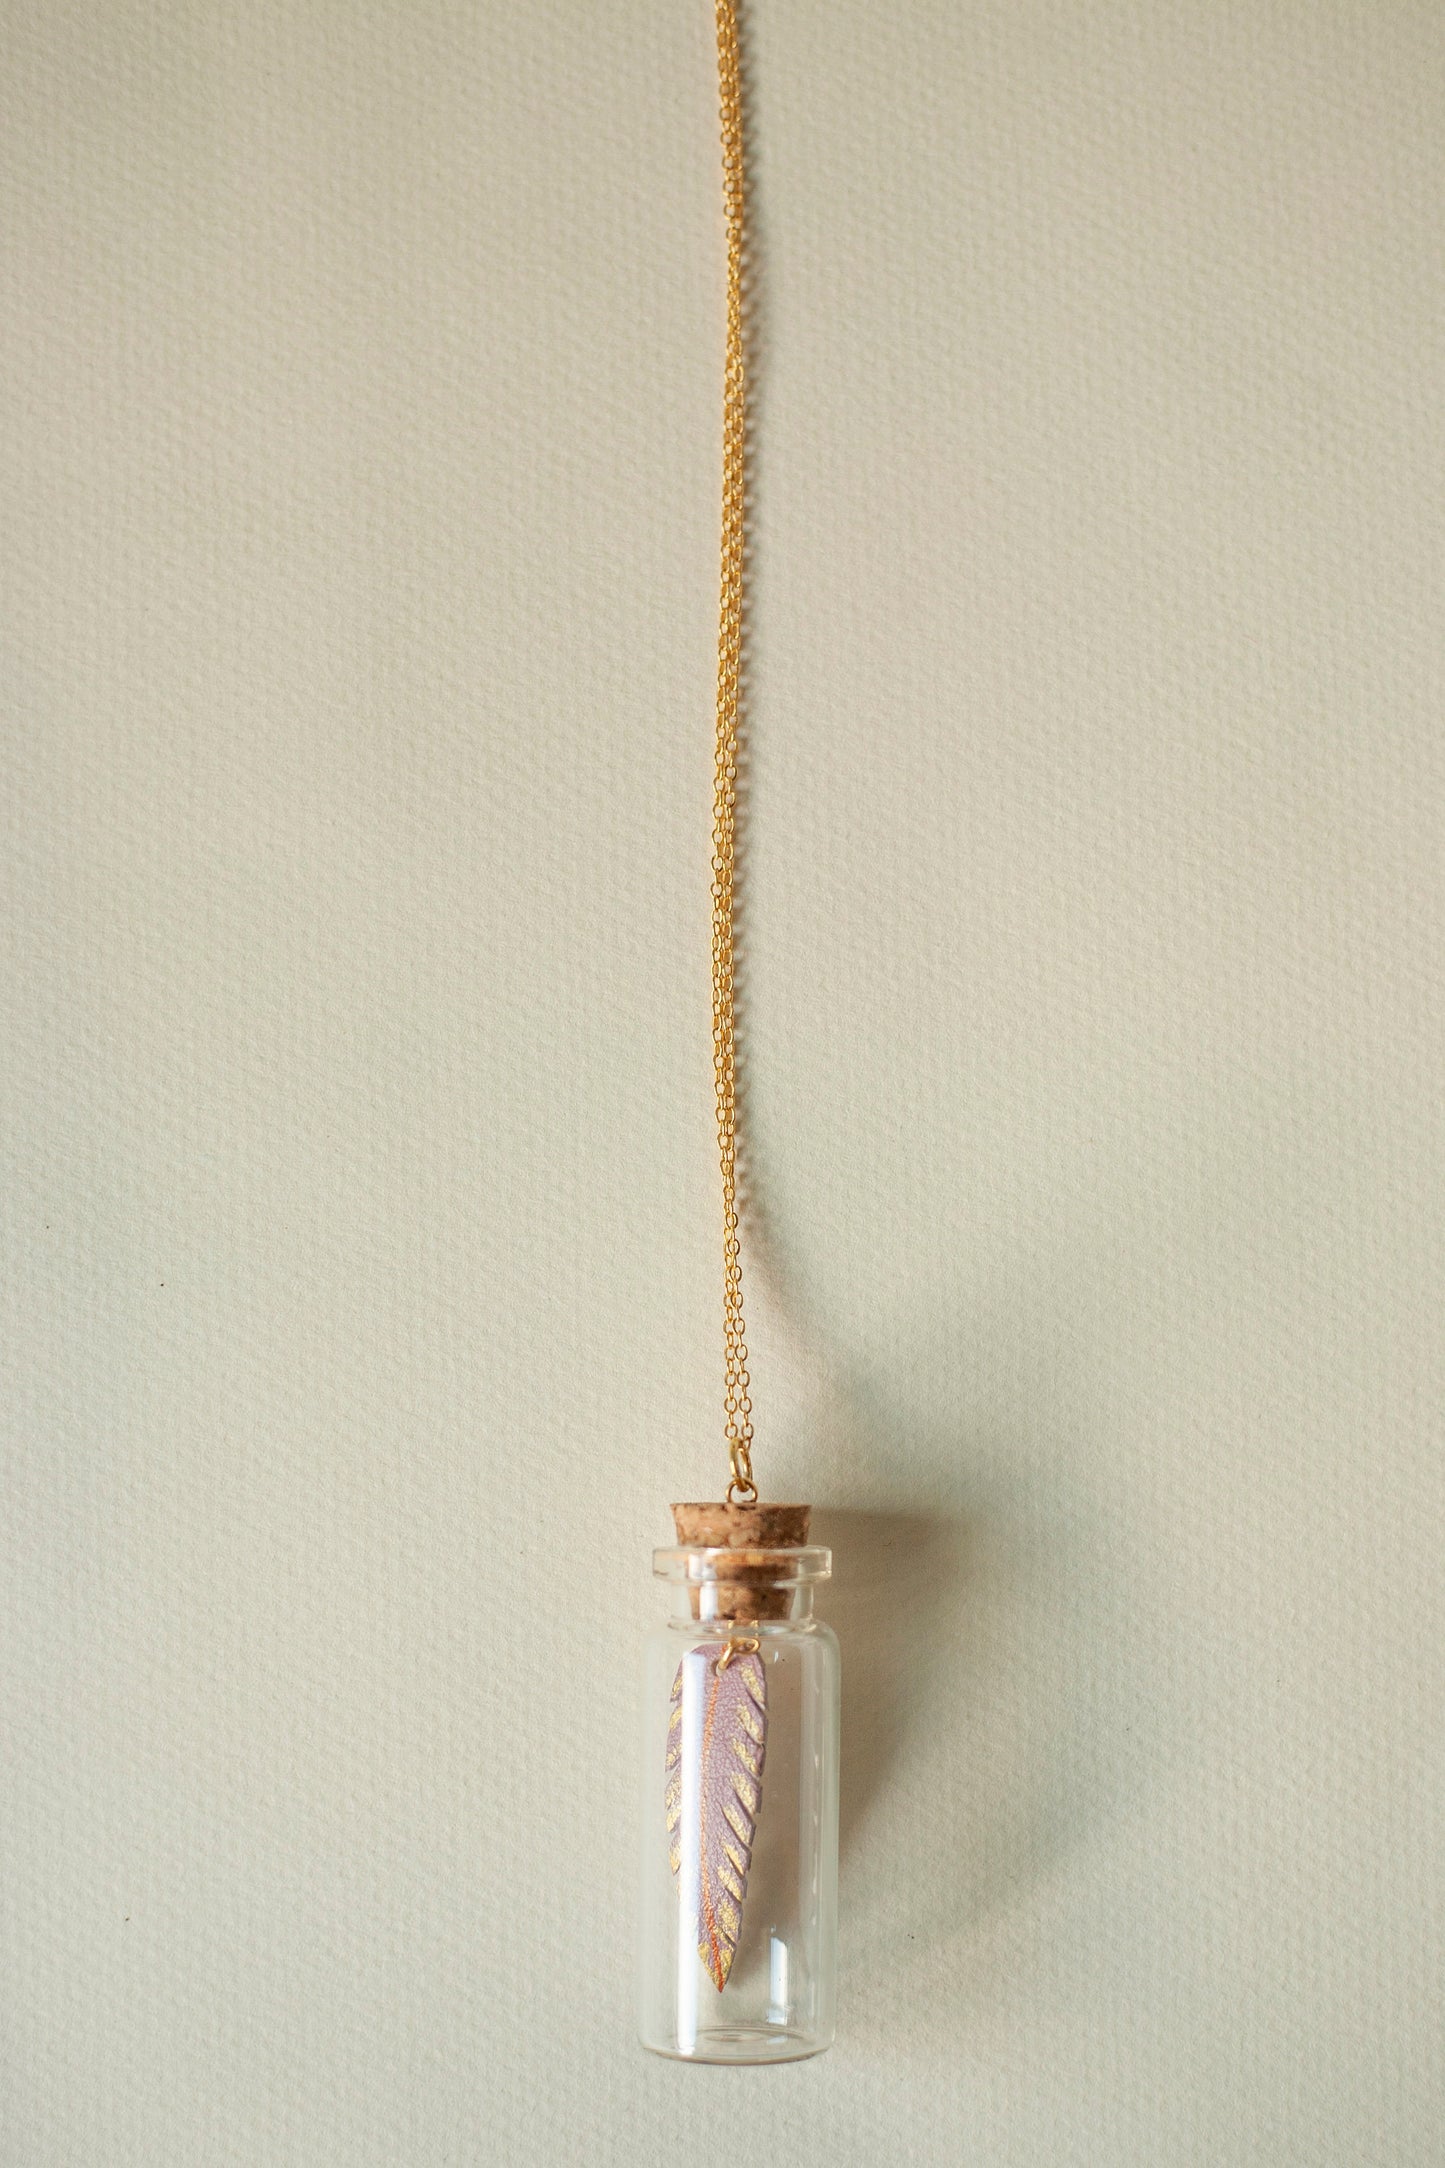 Long necklace with glass vial pendant and leather feather